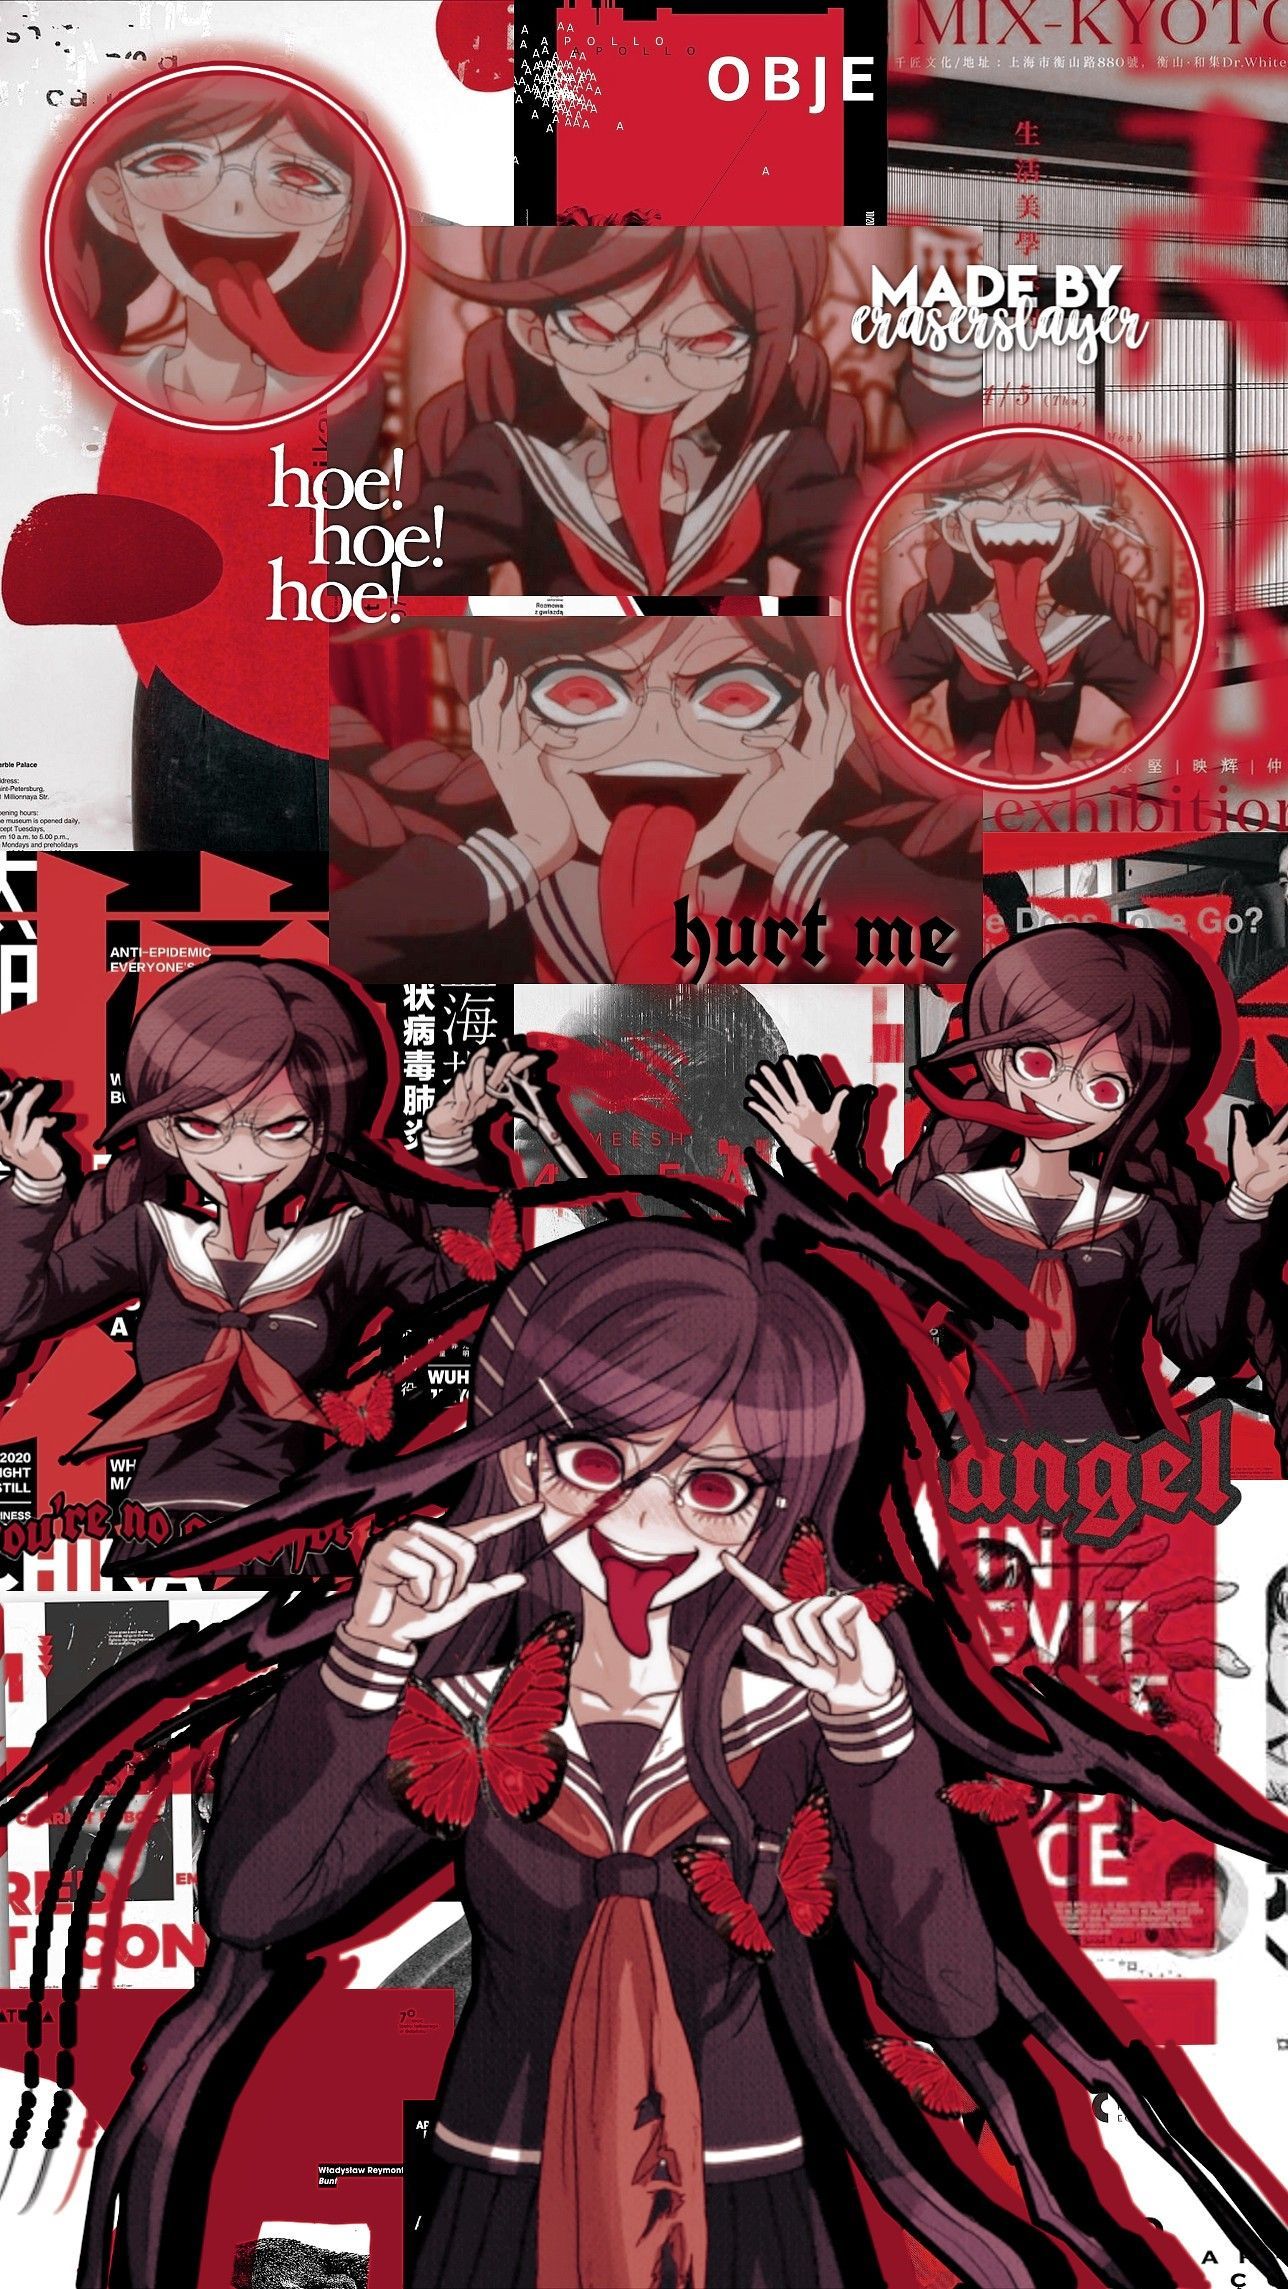 Aesthetic anime wallpaper for phone with a girl in a red and black school uniform - Danganronpa